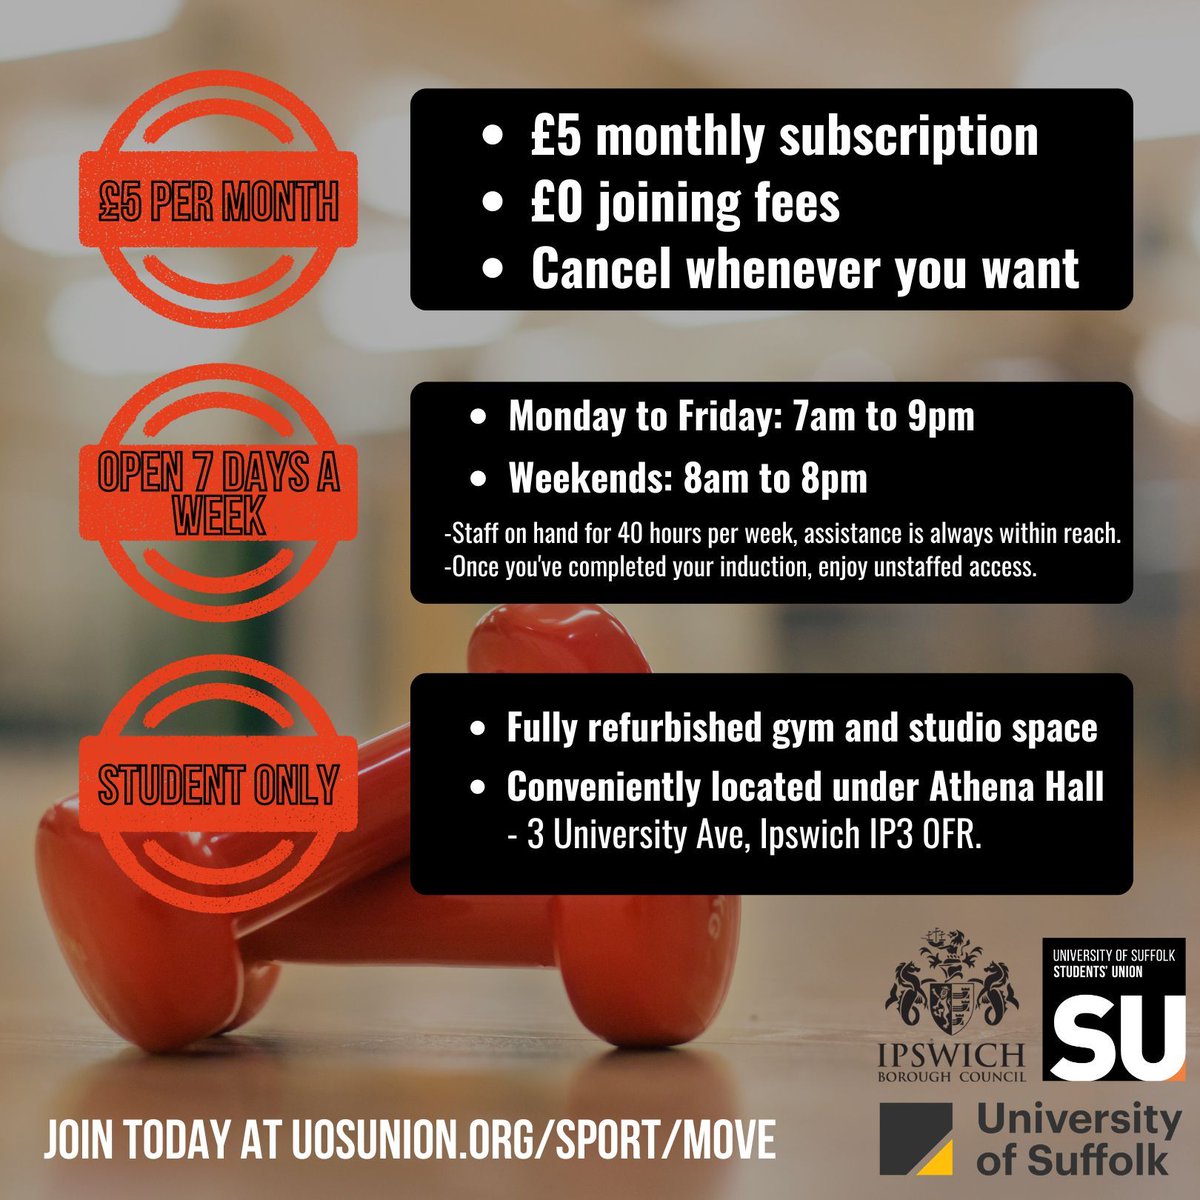 Welcome to Move, the ultimate gym experience exclusively for @uniofsuffolk students! We're thrilled to introduce our fully refurbished gym & studio space, conveniently located under Athena Hall! 🏋️‍♀️ Ready to elevate your fitness game? For sign ups & info: buff.ly/49MiieV